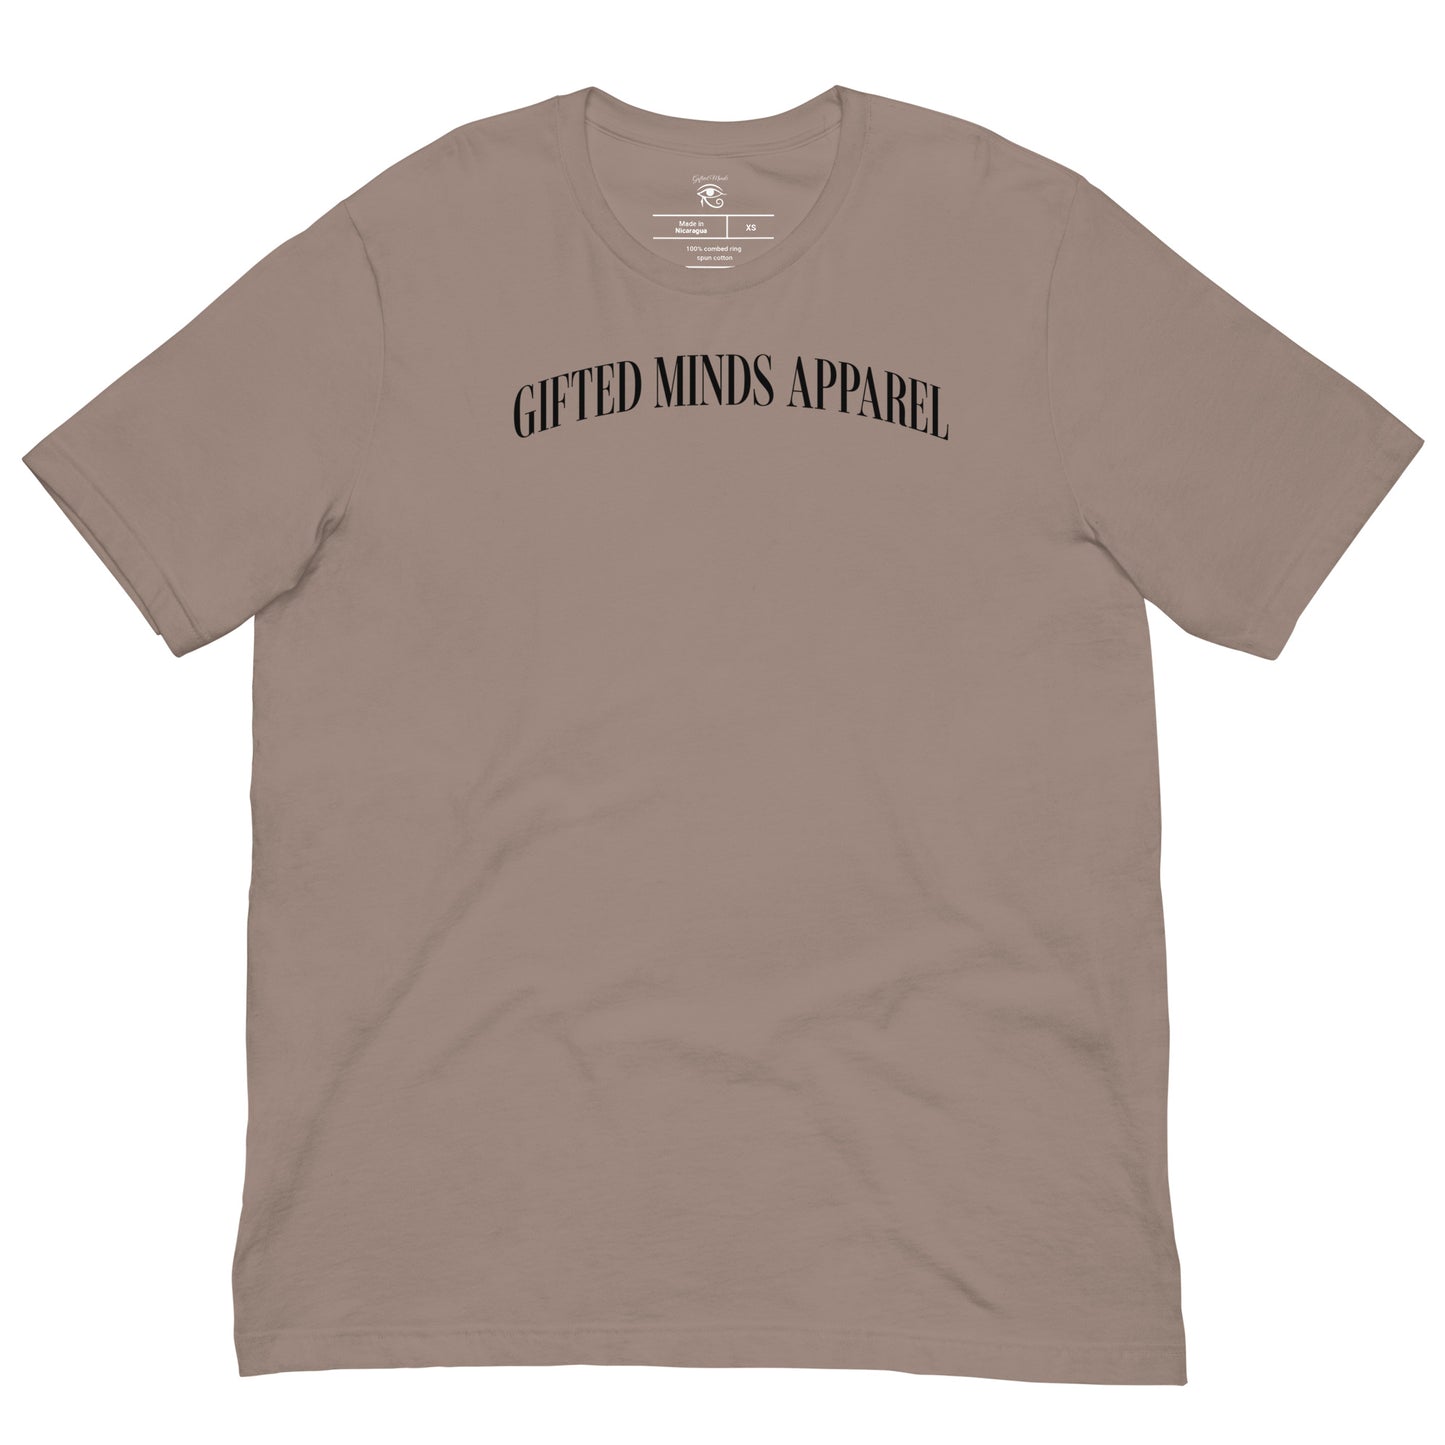 Gifted Minds Apparel Arched T-shirt - GFTD MNDS